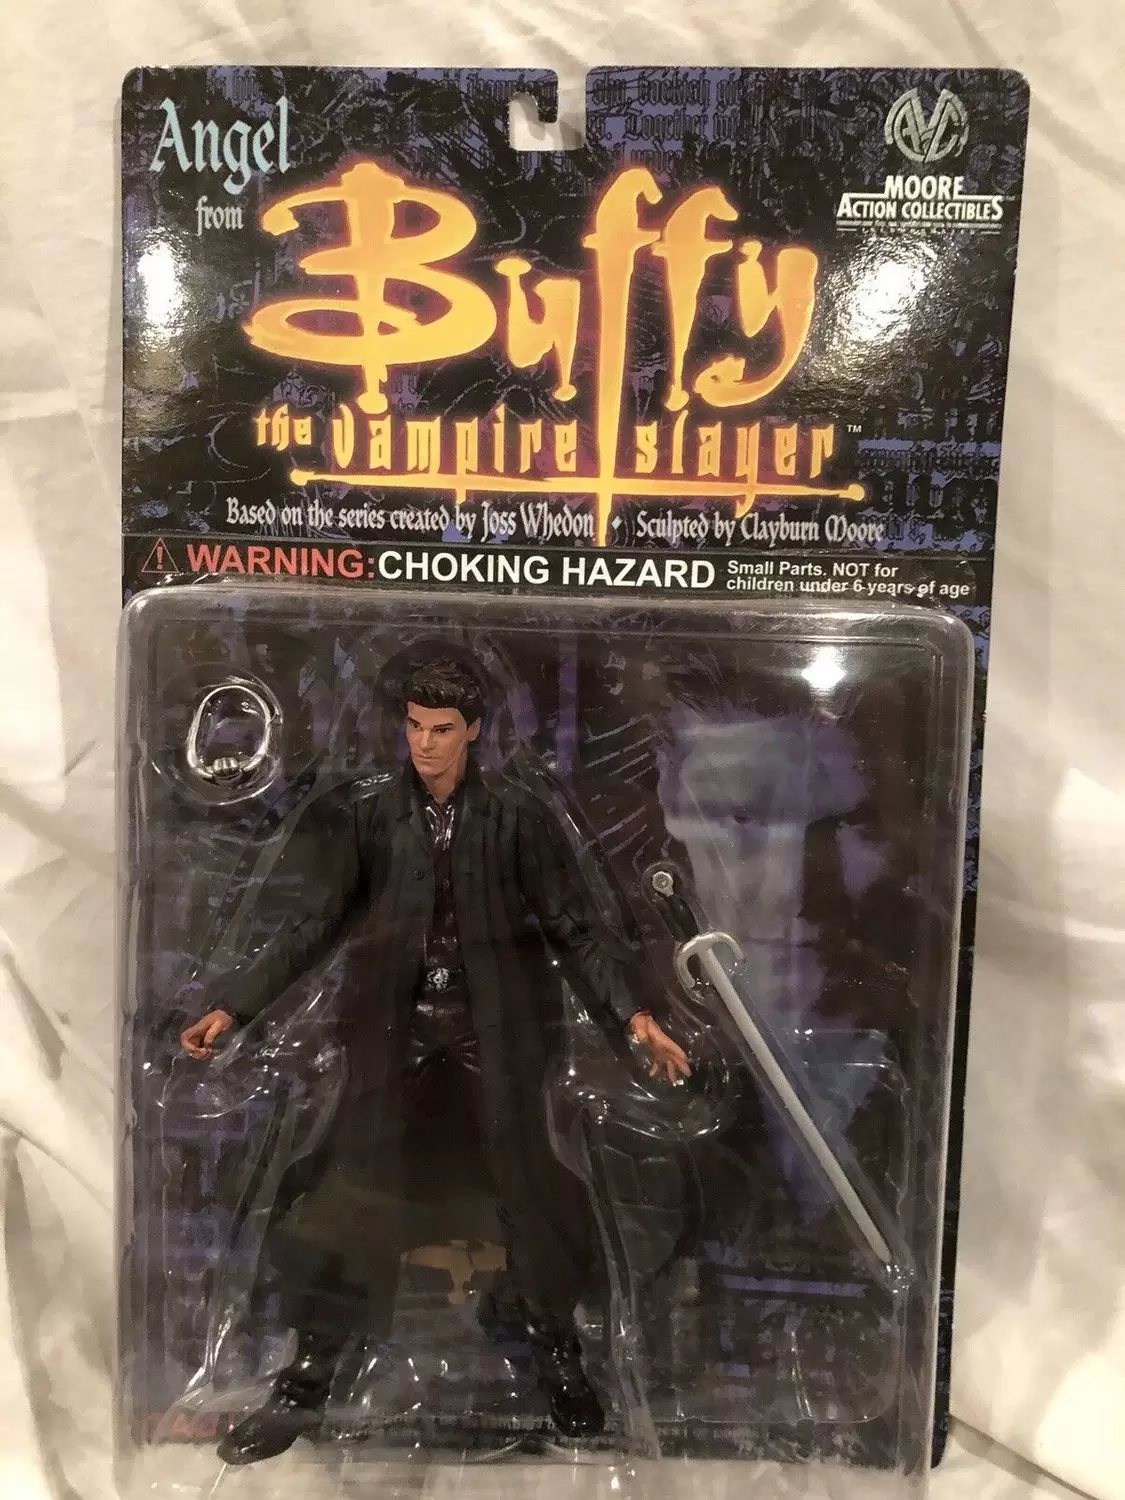 Moore Action Collectibles - Angel